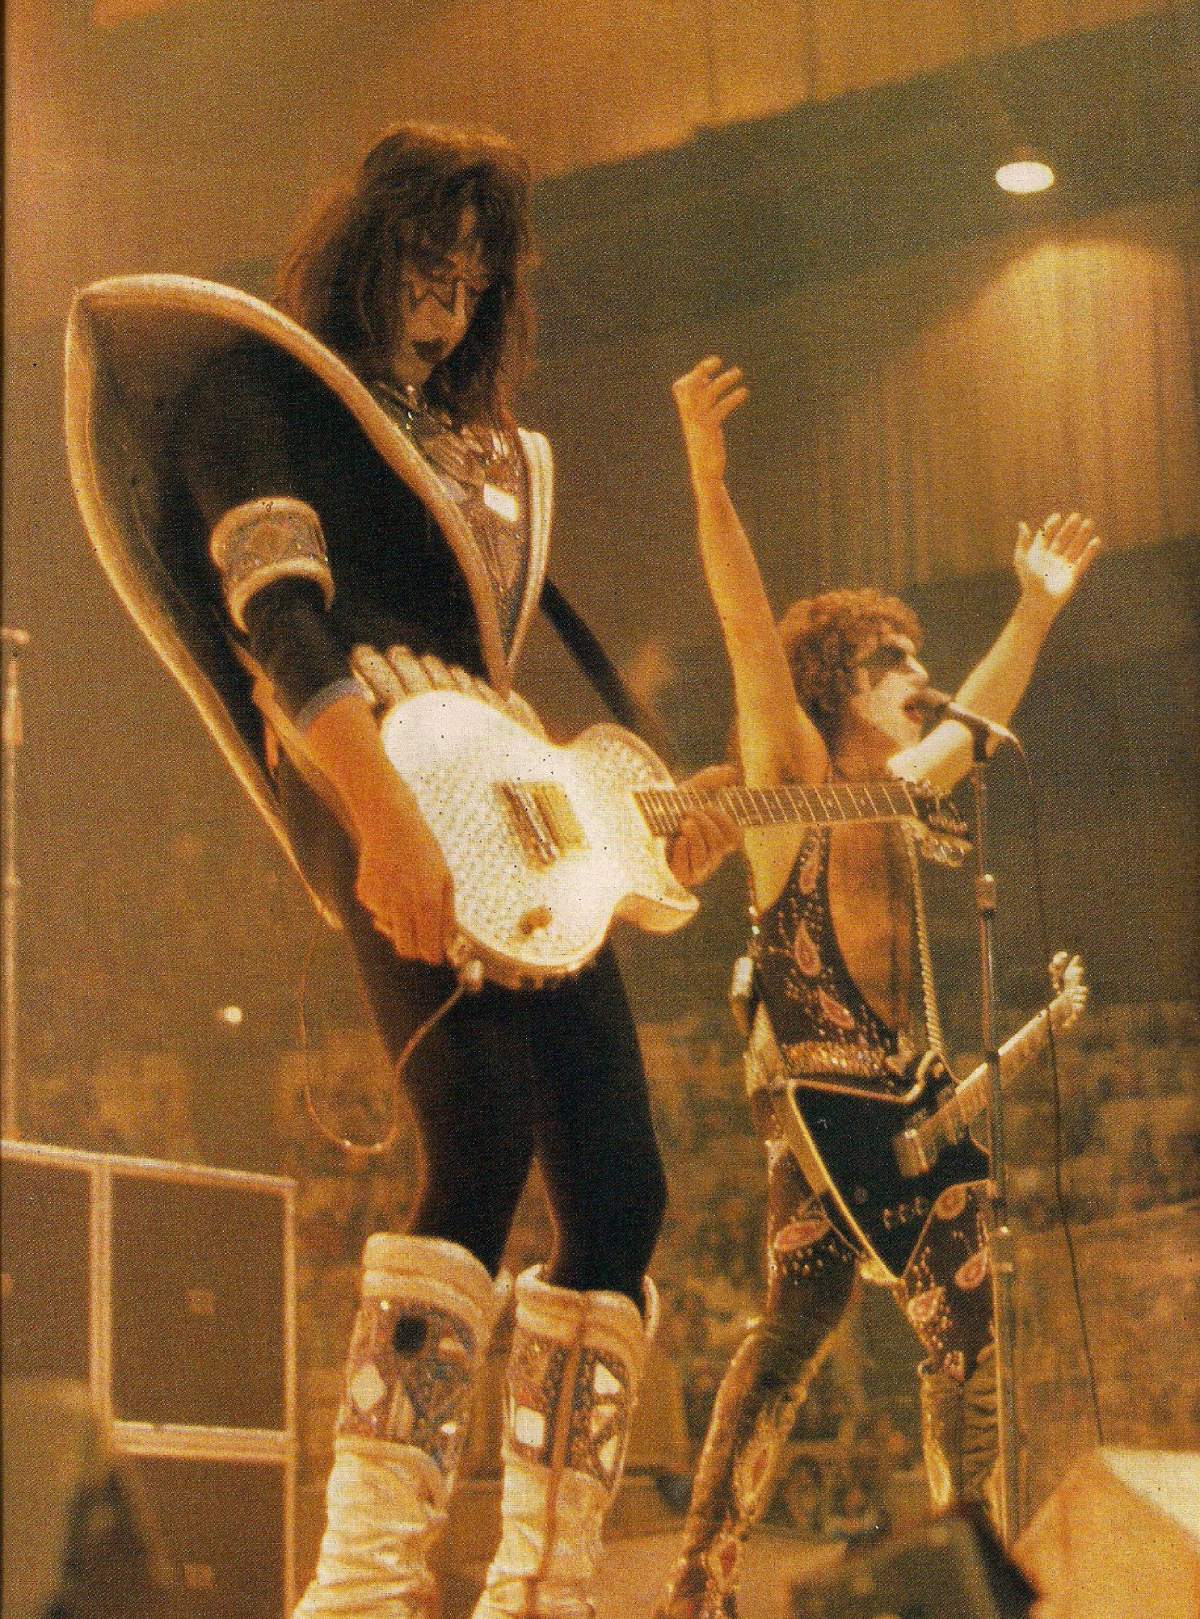 Ace Frehley on stage...